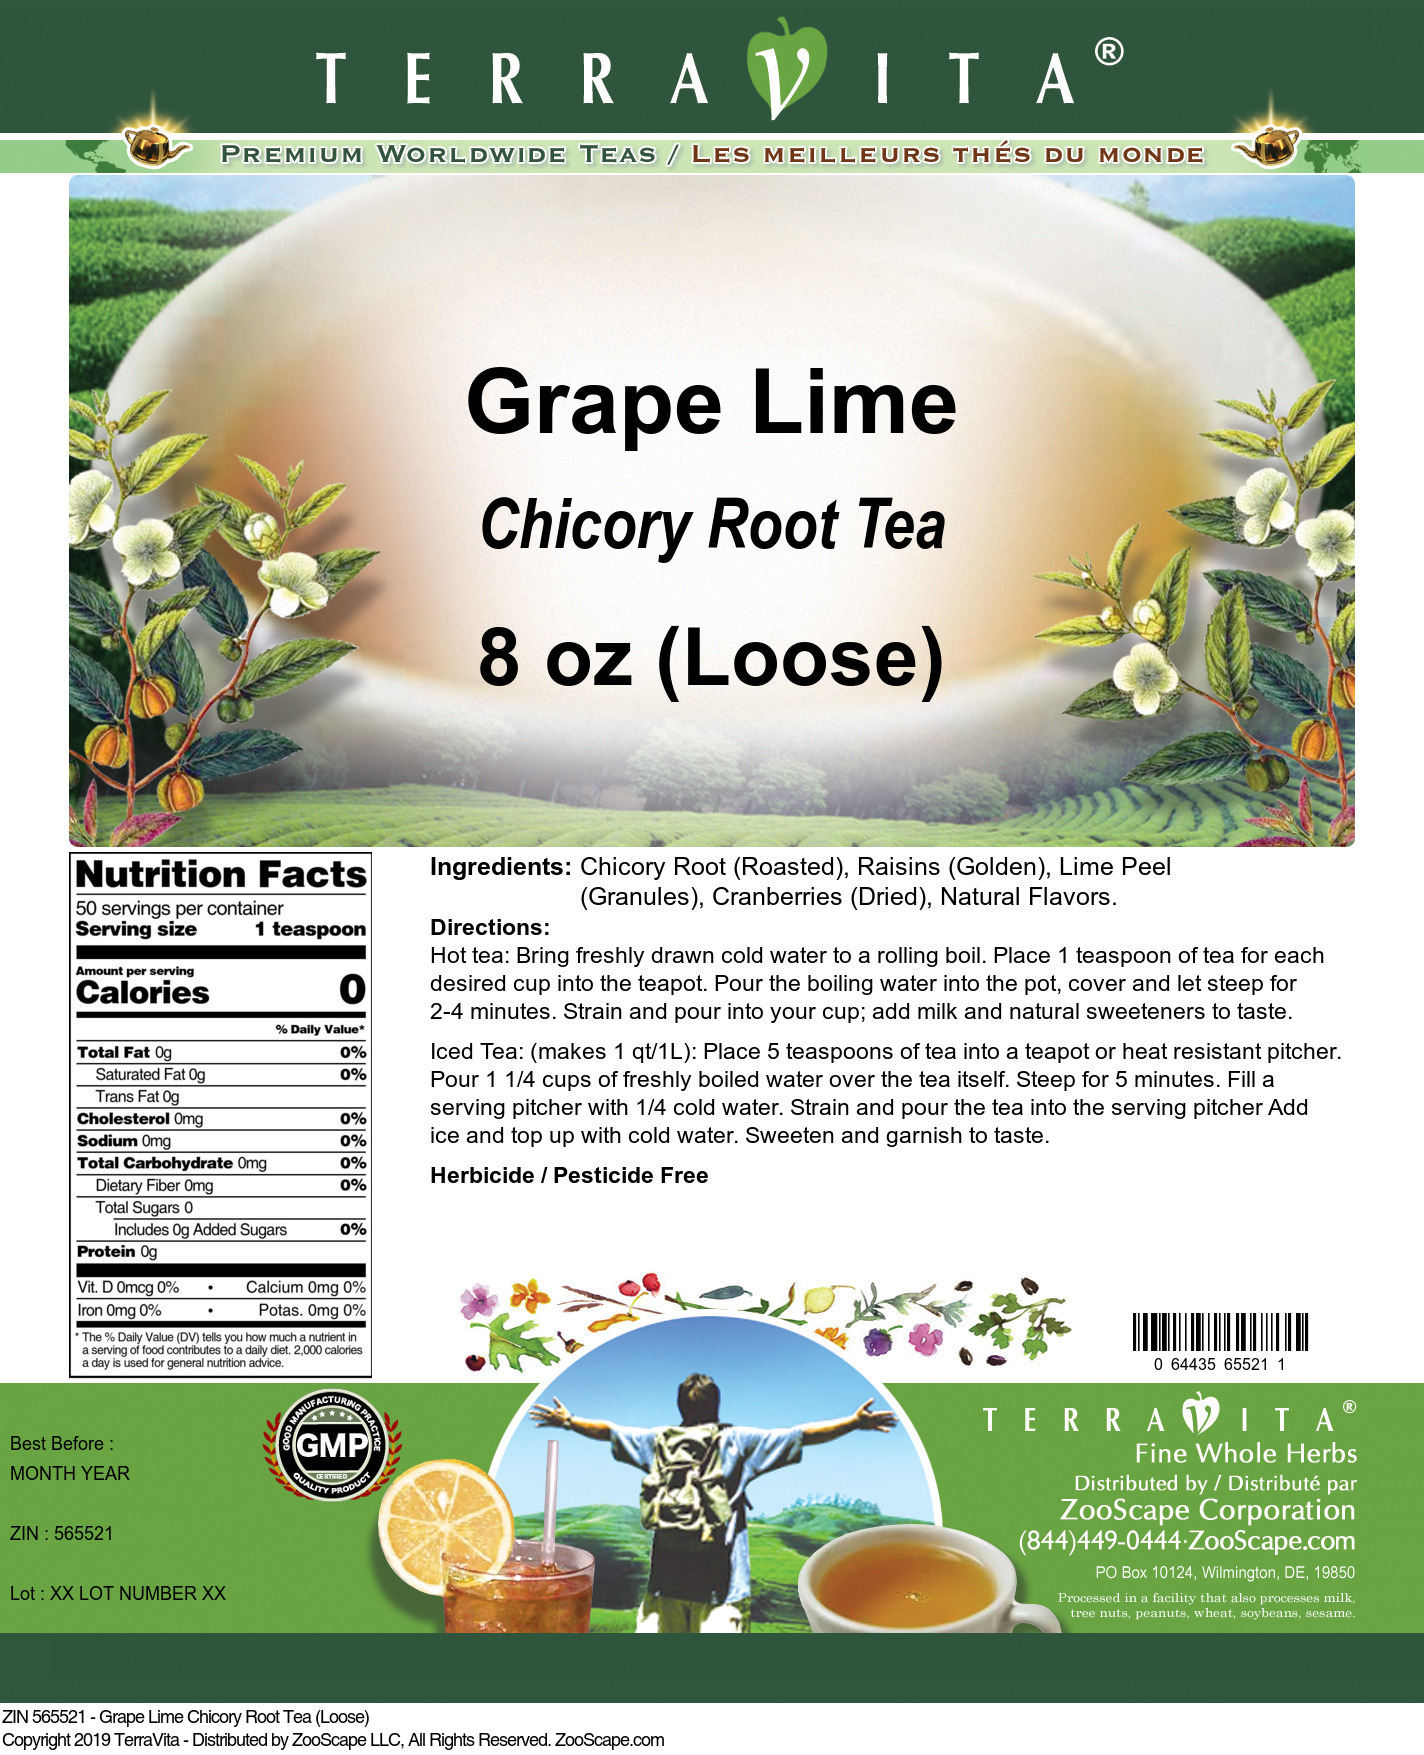 Grape Lime Chicory Root Tea (Loose) - Label